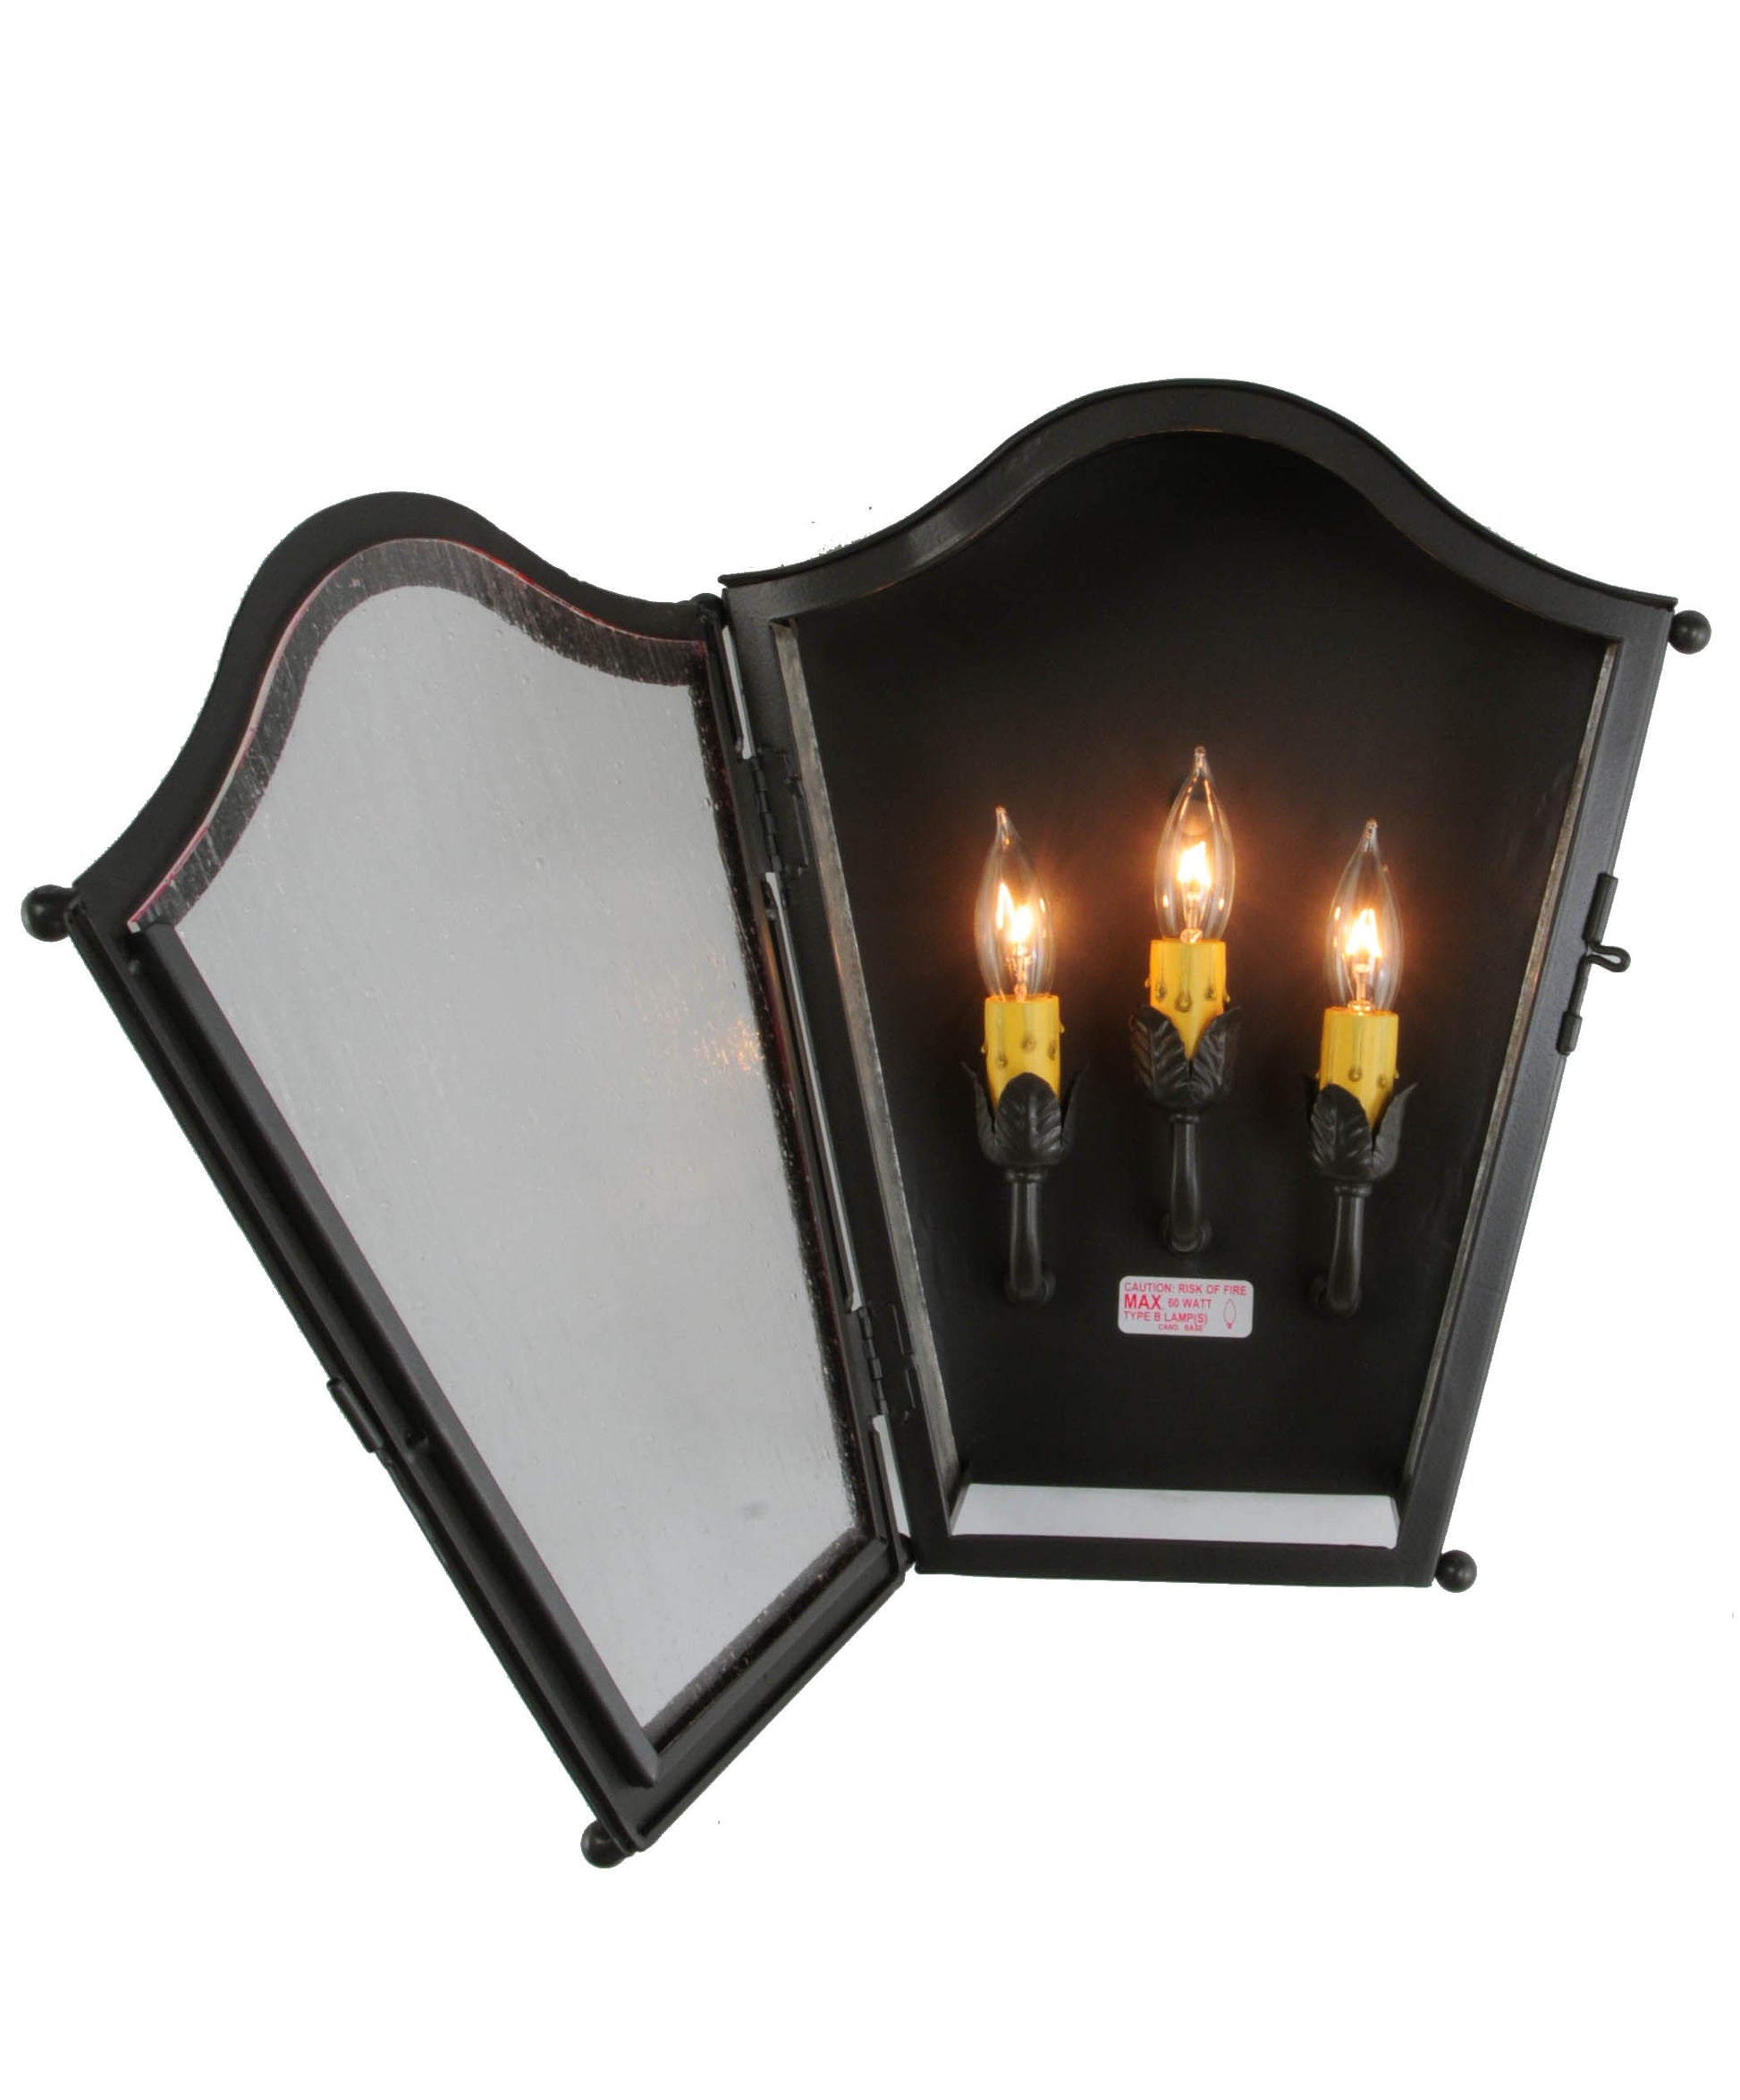 12" Austin 3-Light Wall Sconce by 2nd Ave Lighting